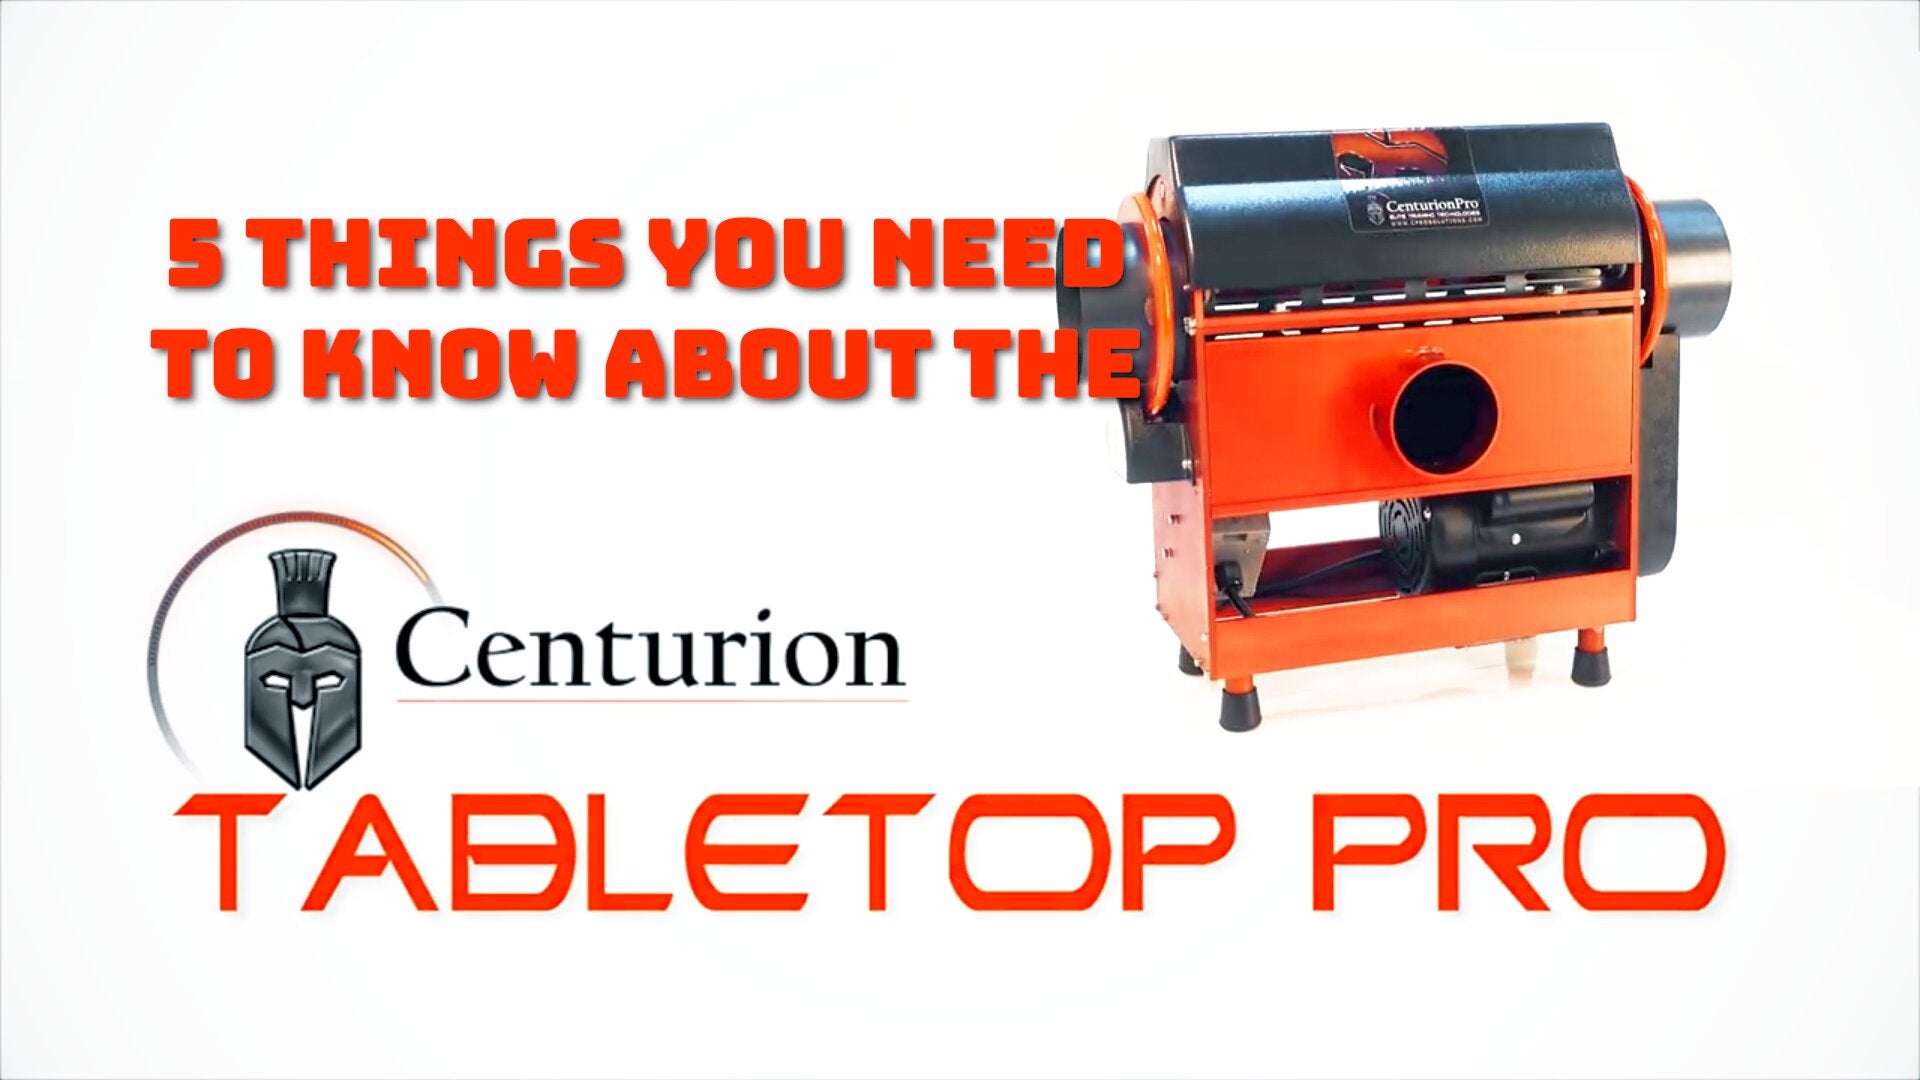 5 Things You Need to Know About the CenturionPro Tabletop Automatic Bud Trimmer